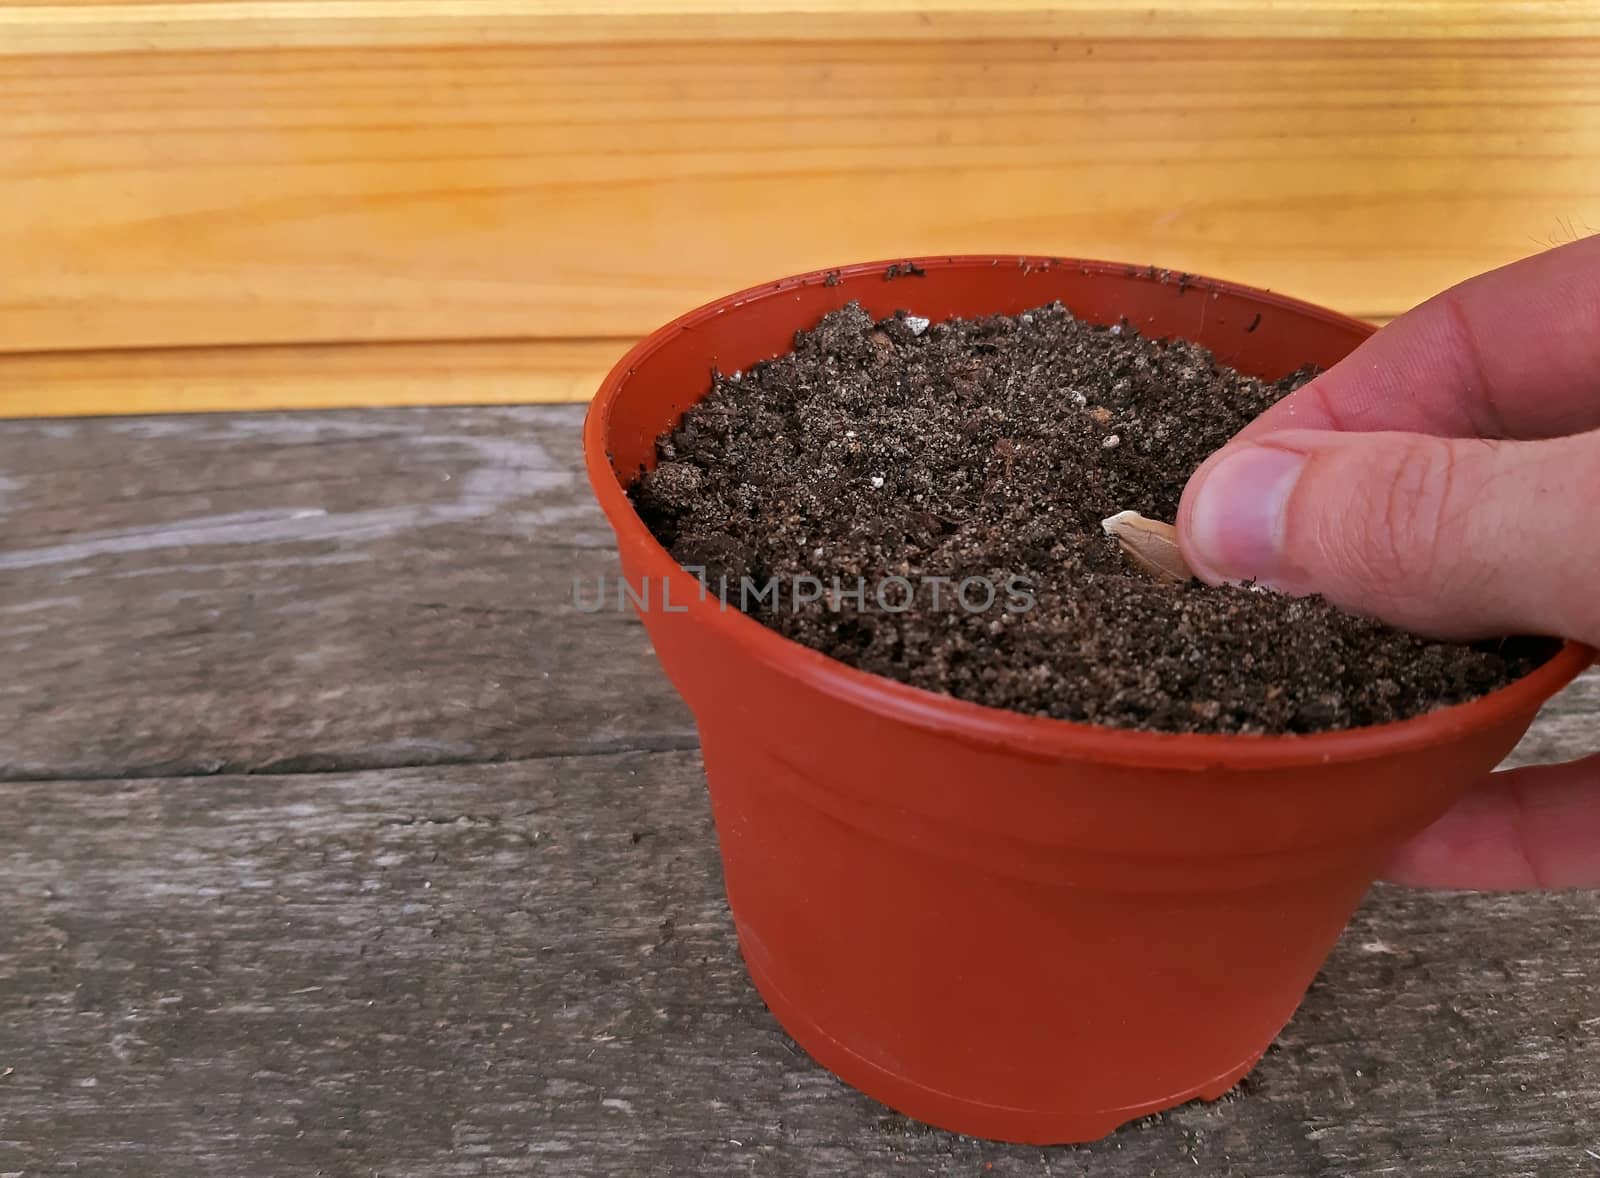 Hand planting a seed in a flower pot.